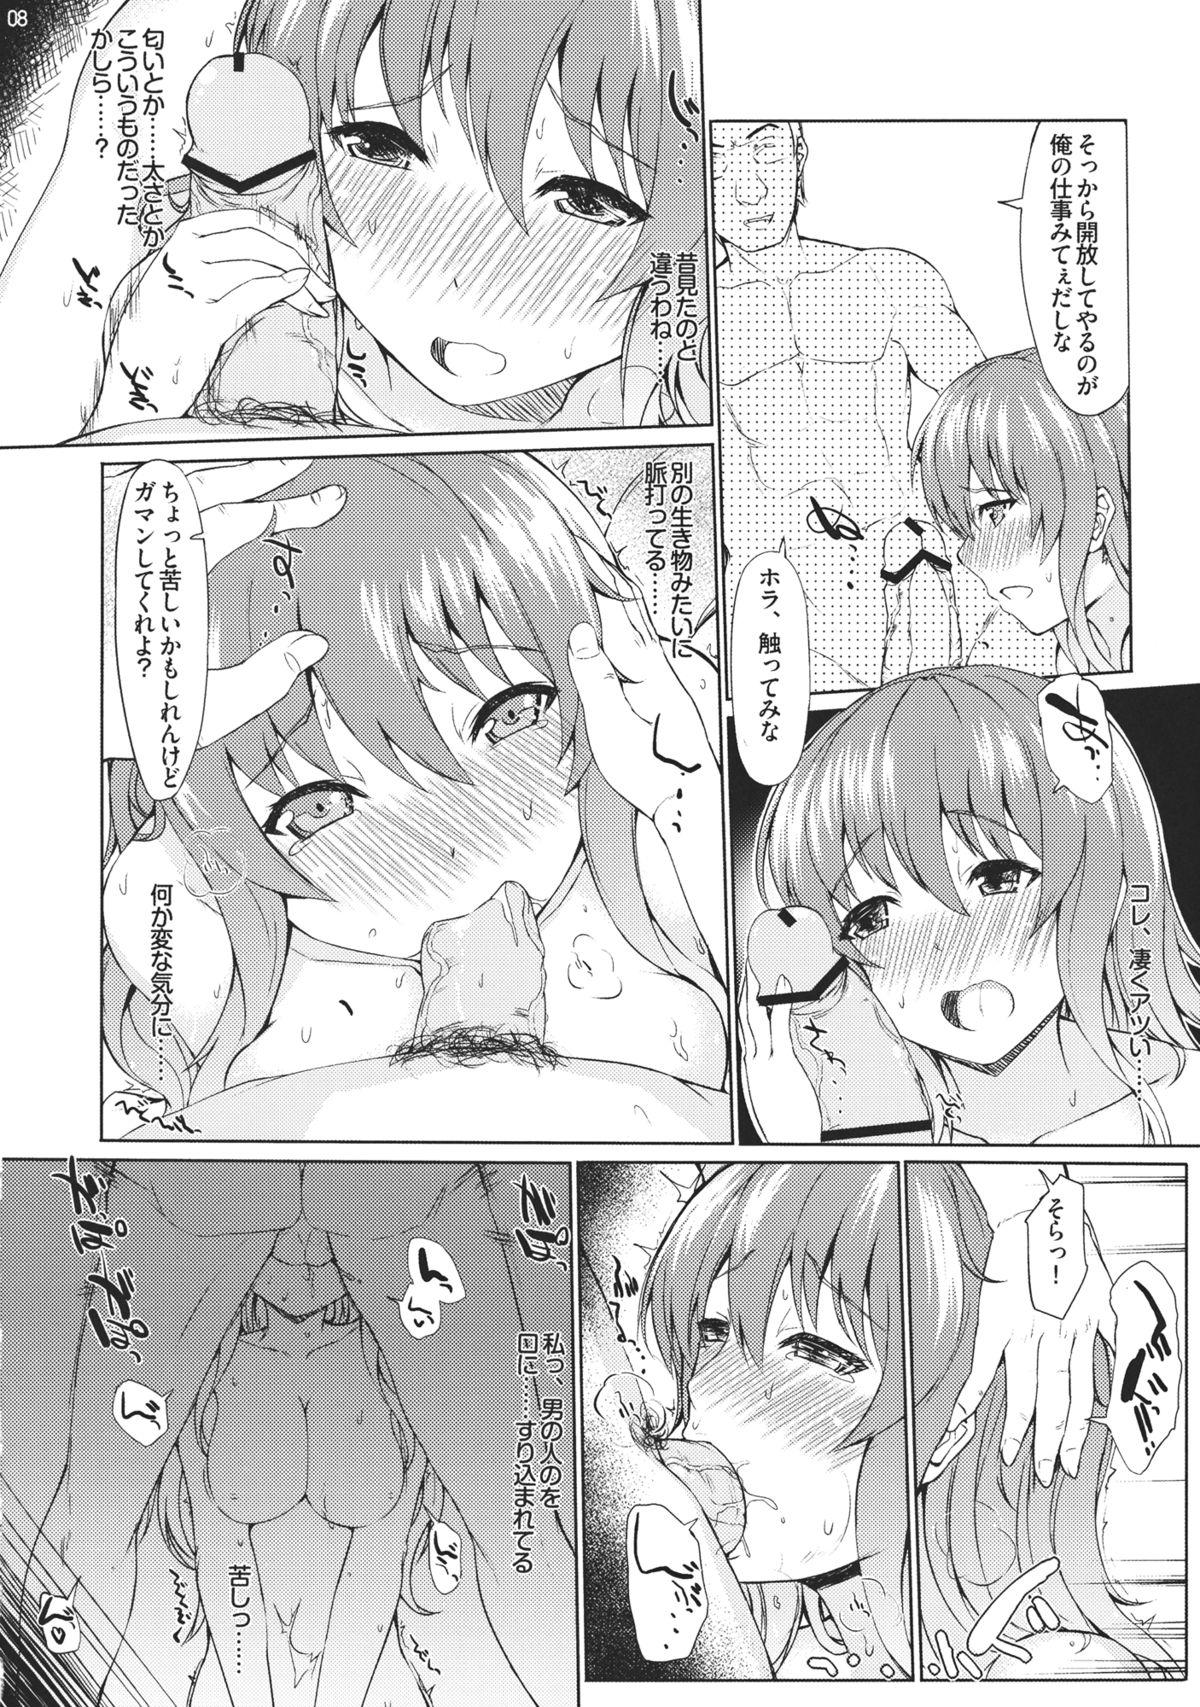 Massive NORMA JEAN - Touhou project Sloppy Blowjob - Page 8